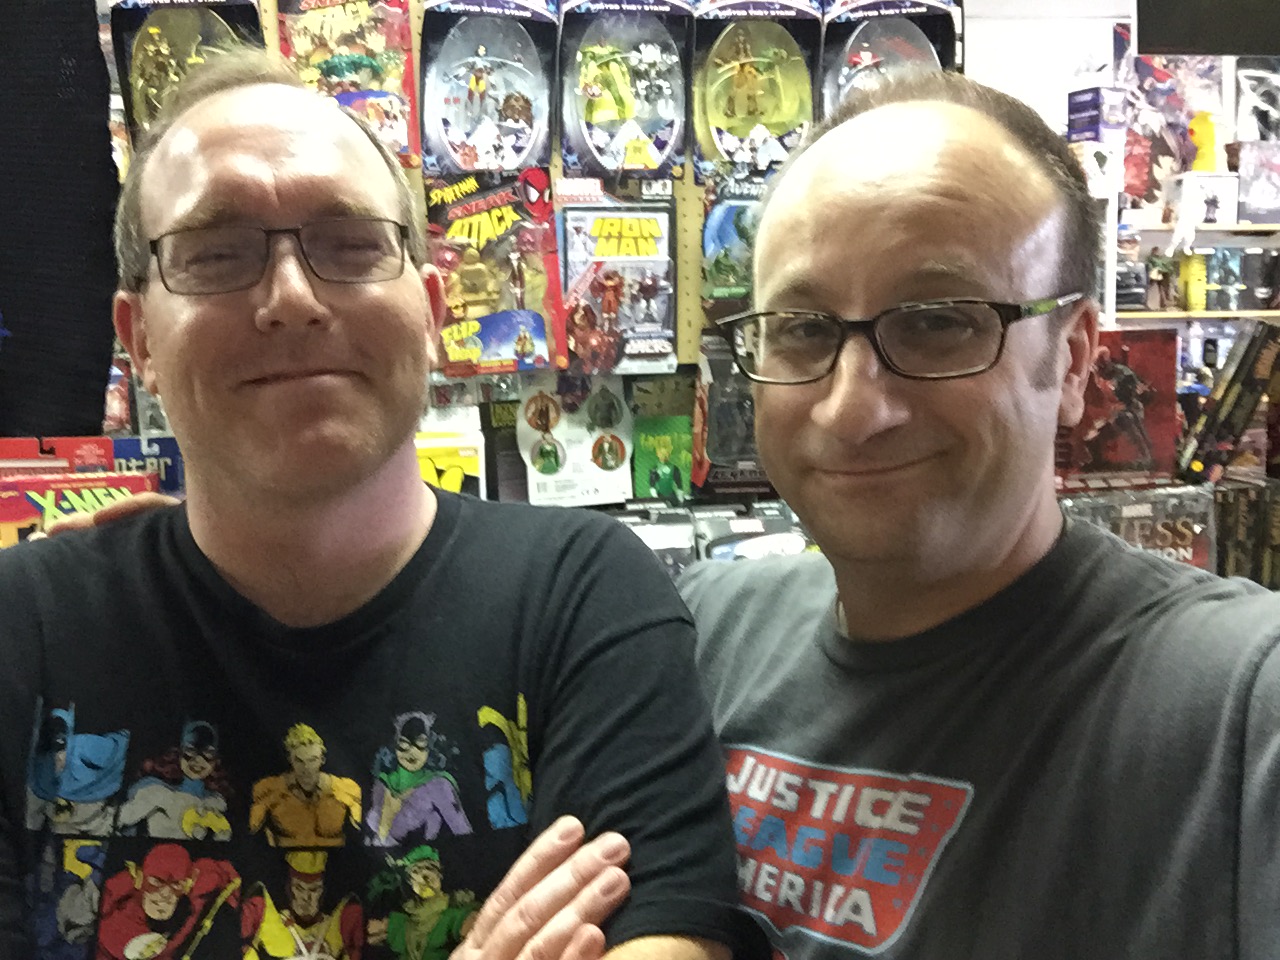 Chris Franklin from Super Mates Podcast and Irredeemable Shag from Fire and Water Podcast